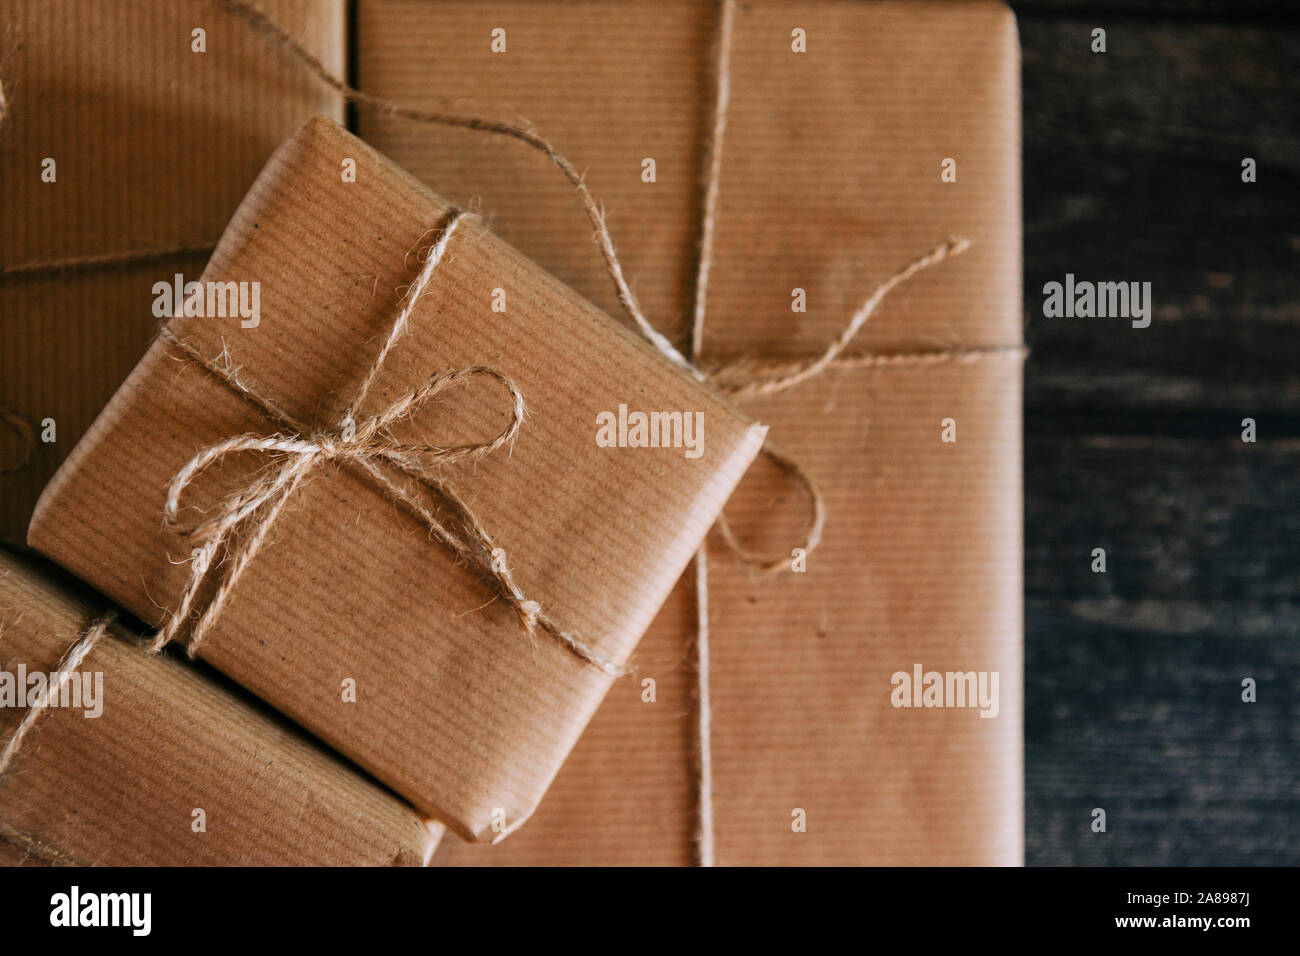 Presents wrapped in brown paper and string Stock Photo